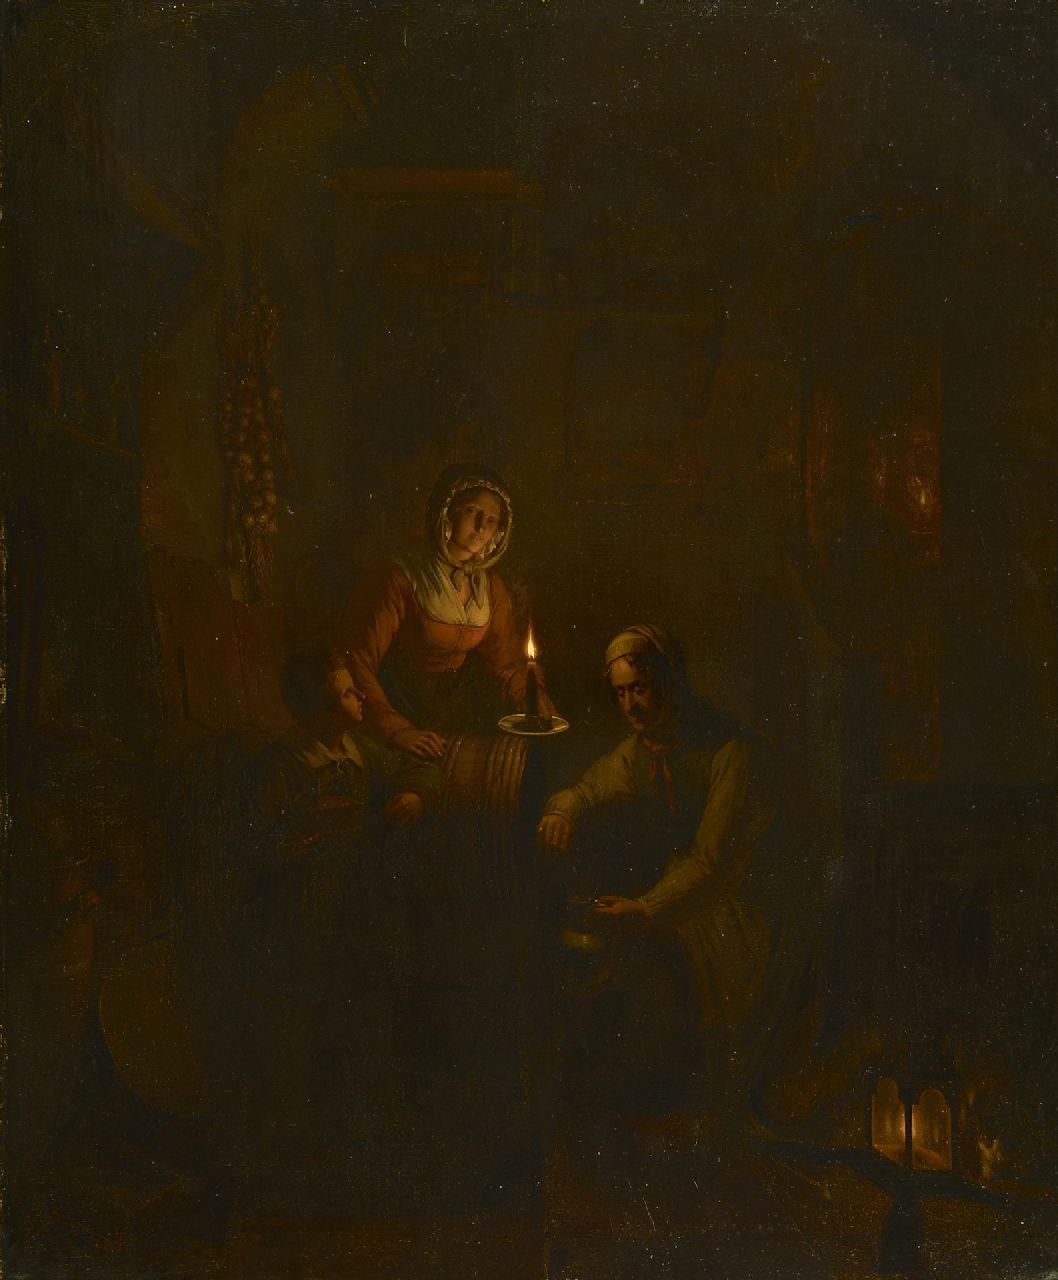 Haanen G.G.  | George Gillis Haanen | Paintings offered for sale | Tapping wine by candlelight, oil on panel 58.1 x 47.7 cm, signed l.r. and dated 1837